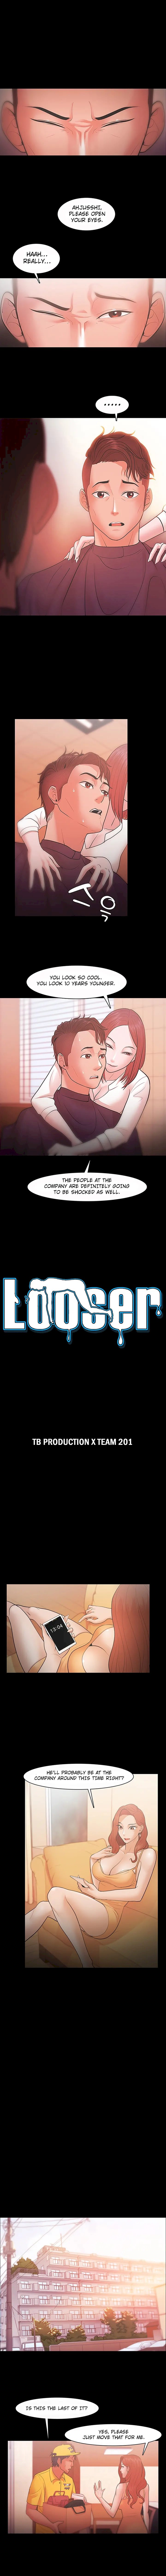 Loser (Team 201) - Chapter 20 Page 2